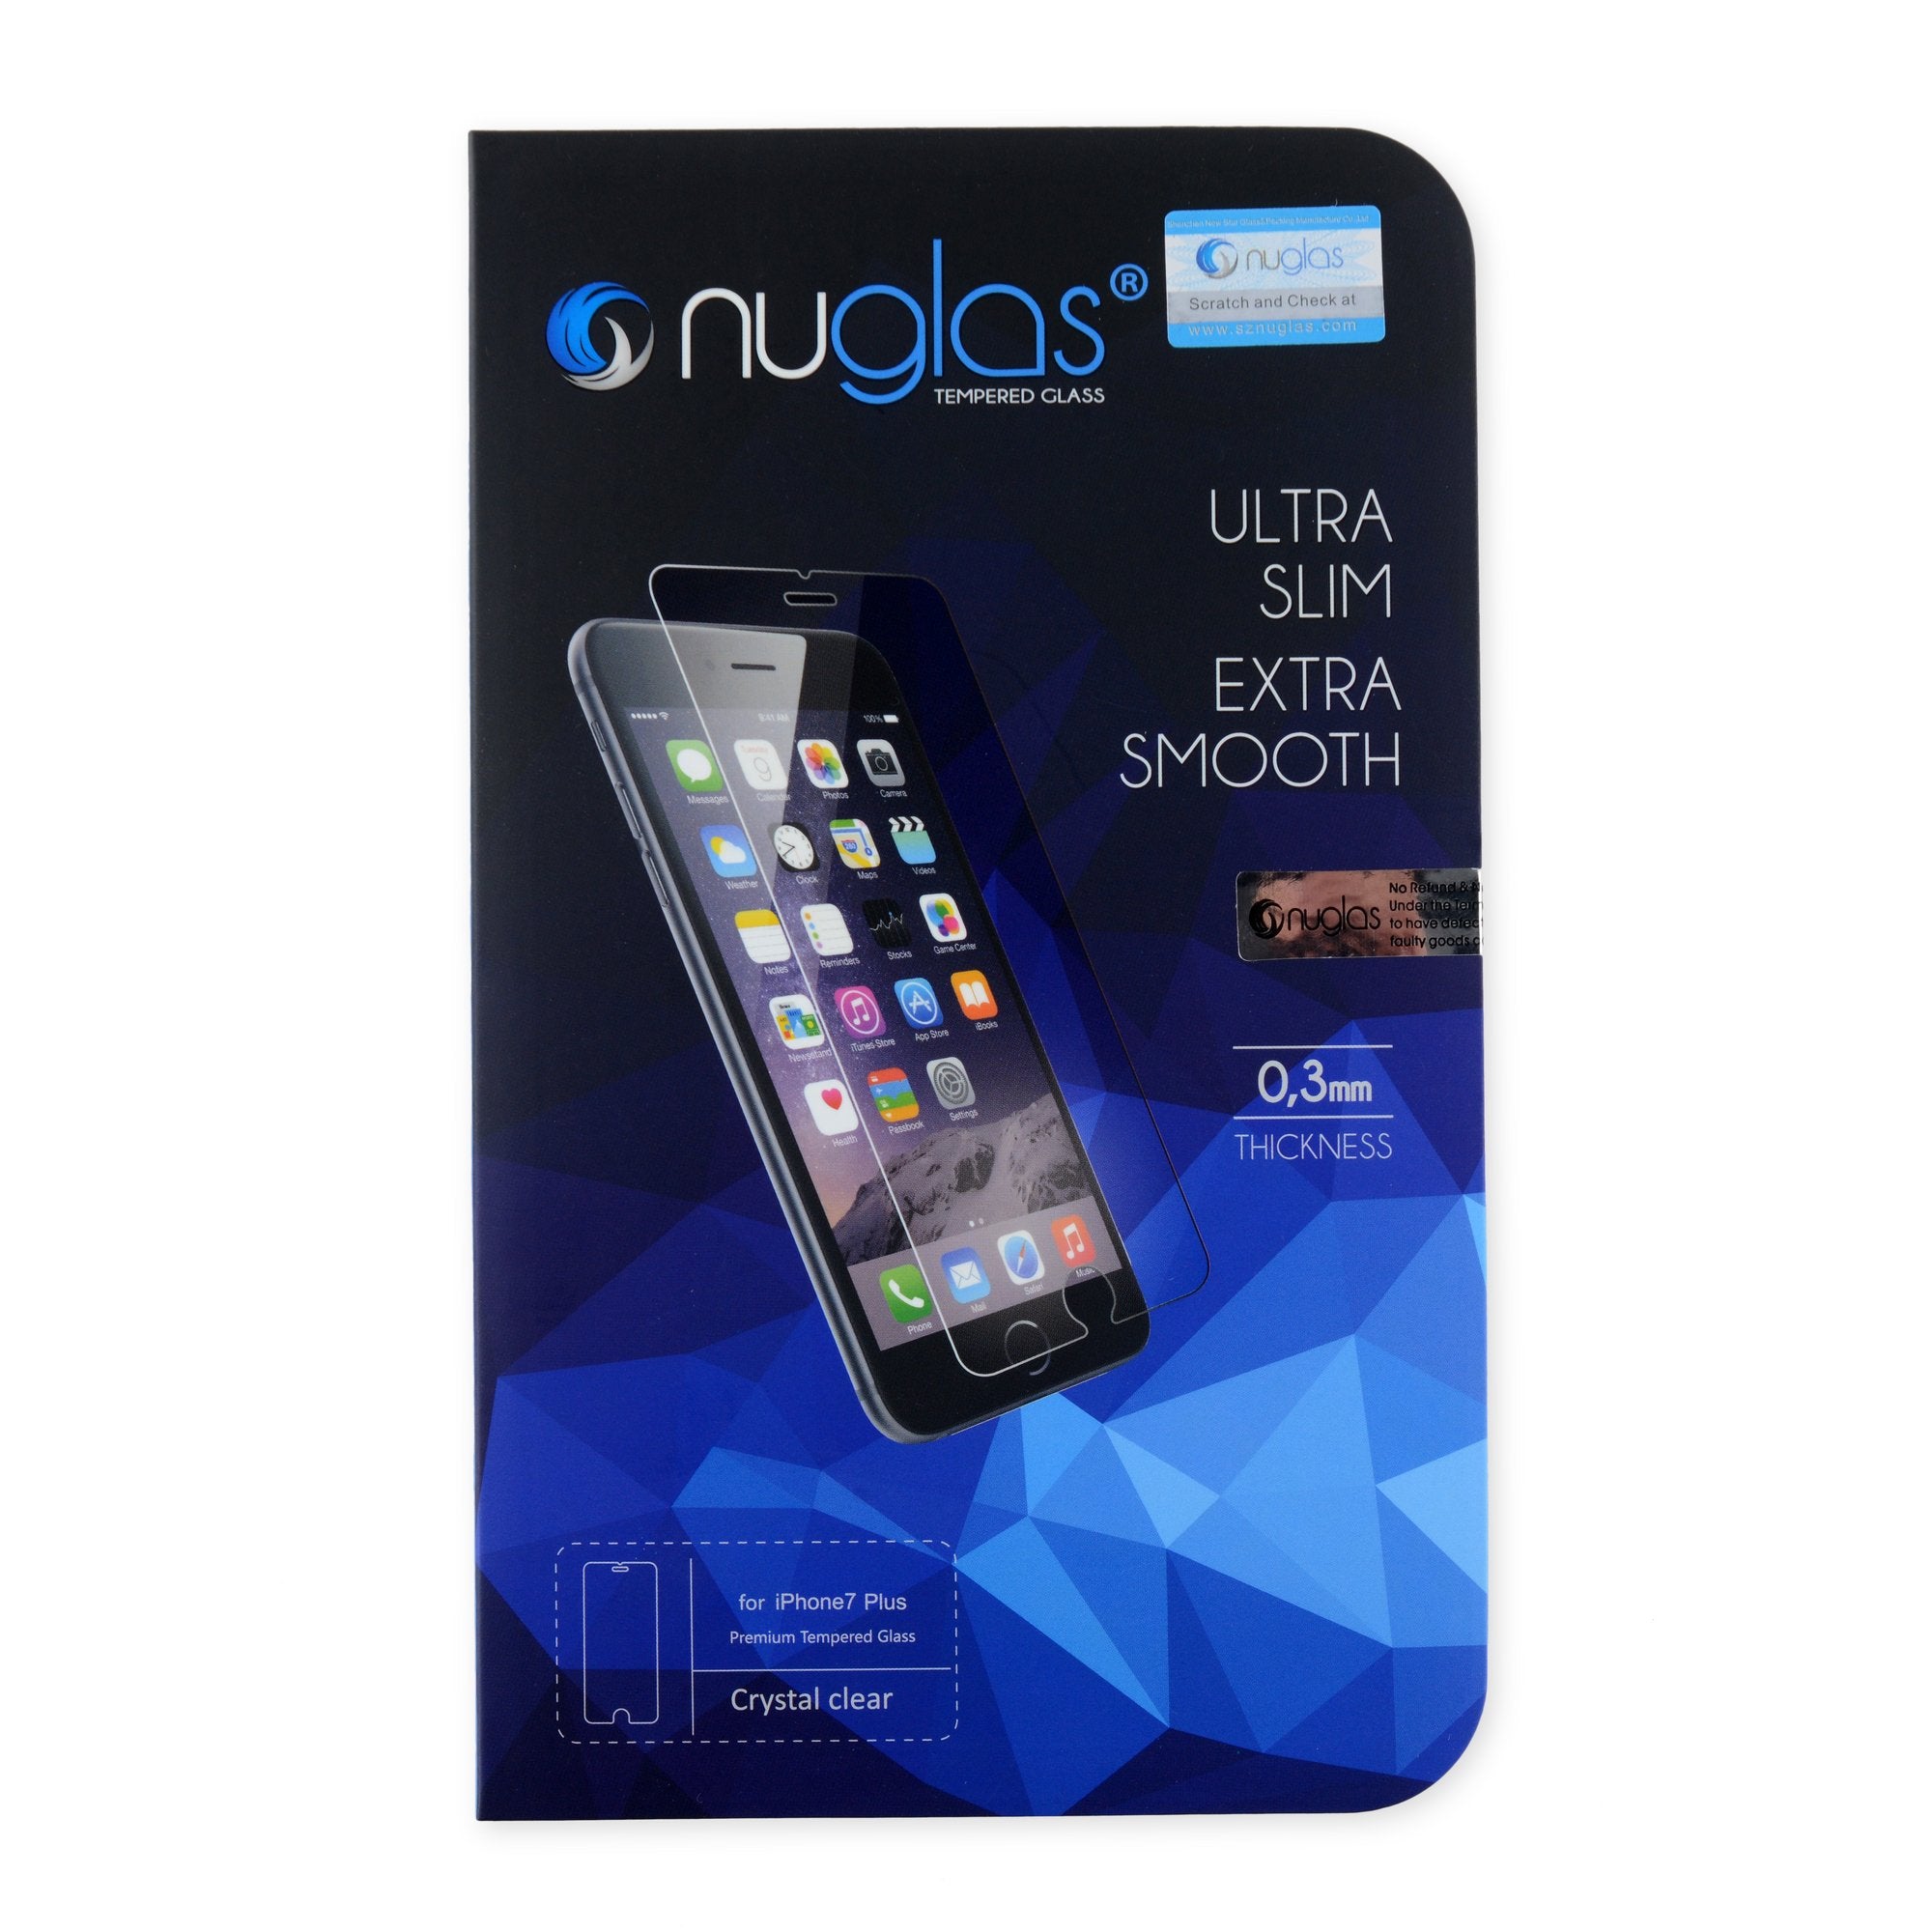 NuGlas Tempered Glass Screen Protector for iPhone 7 Plus/8 Plus